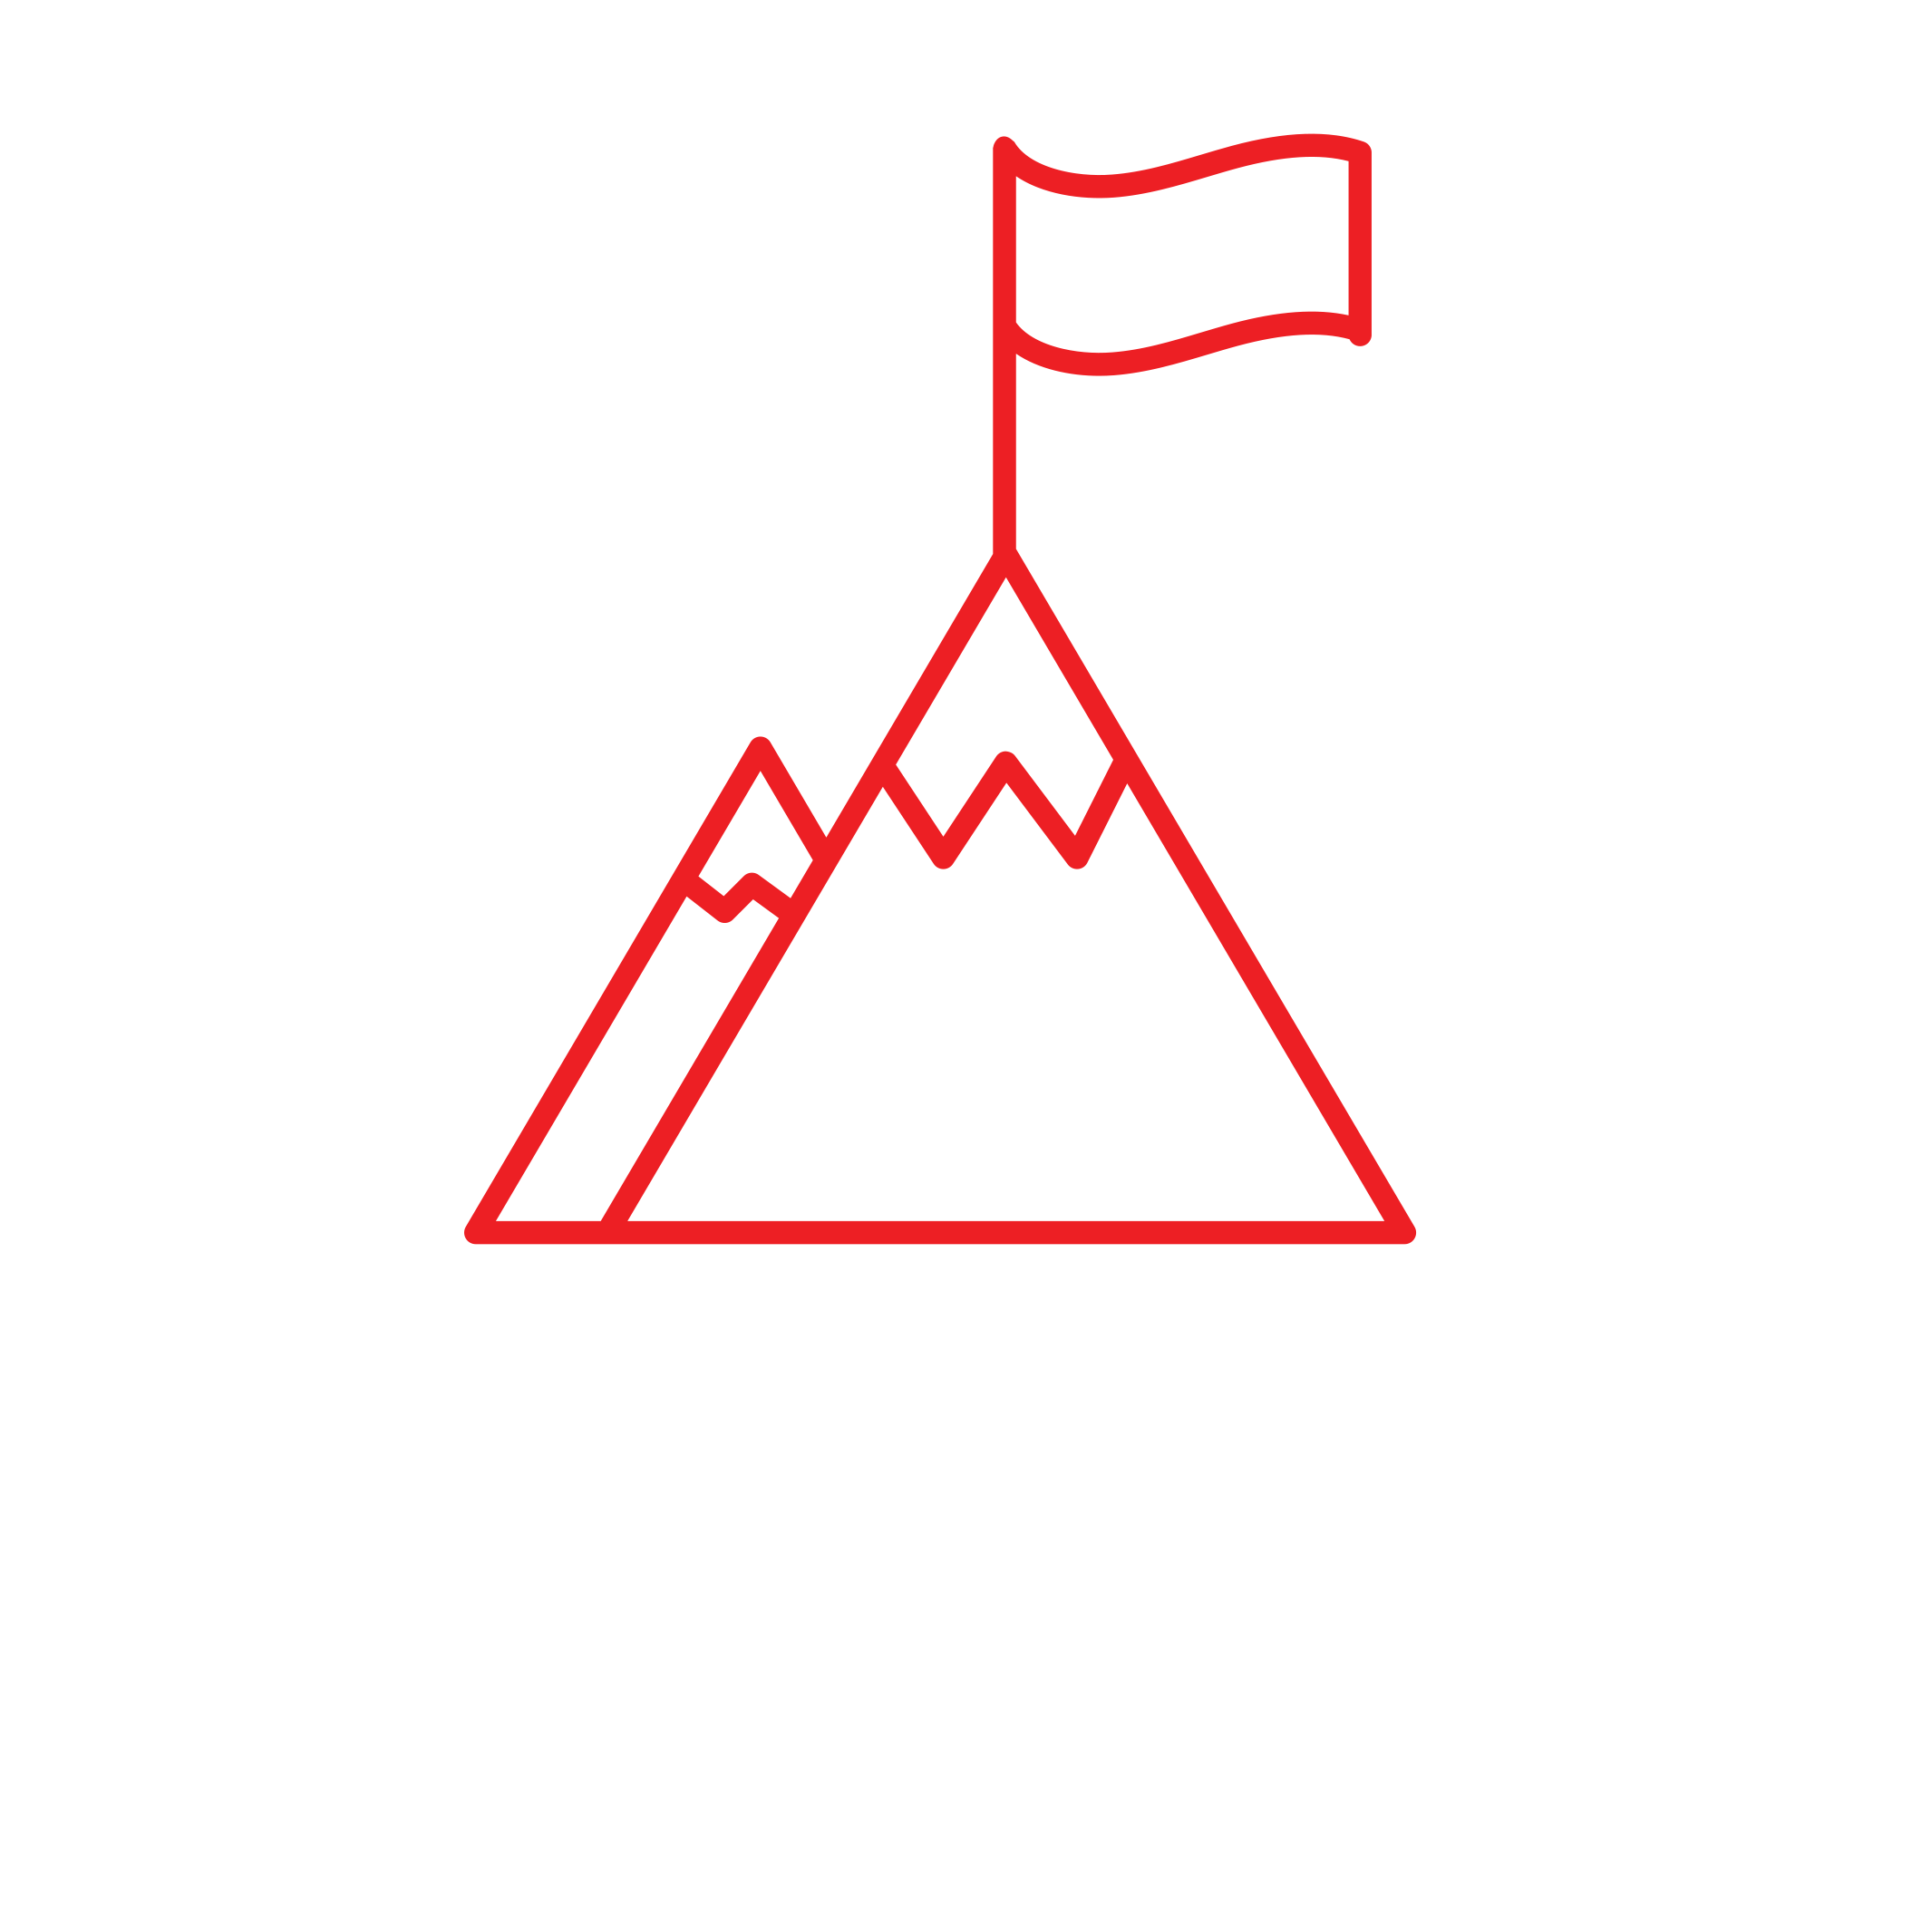 Stand out from competition